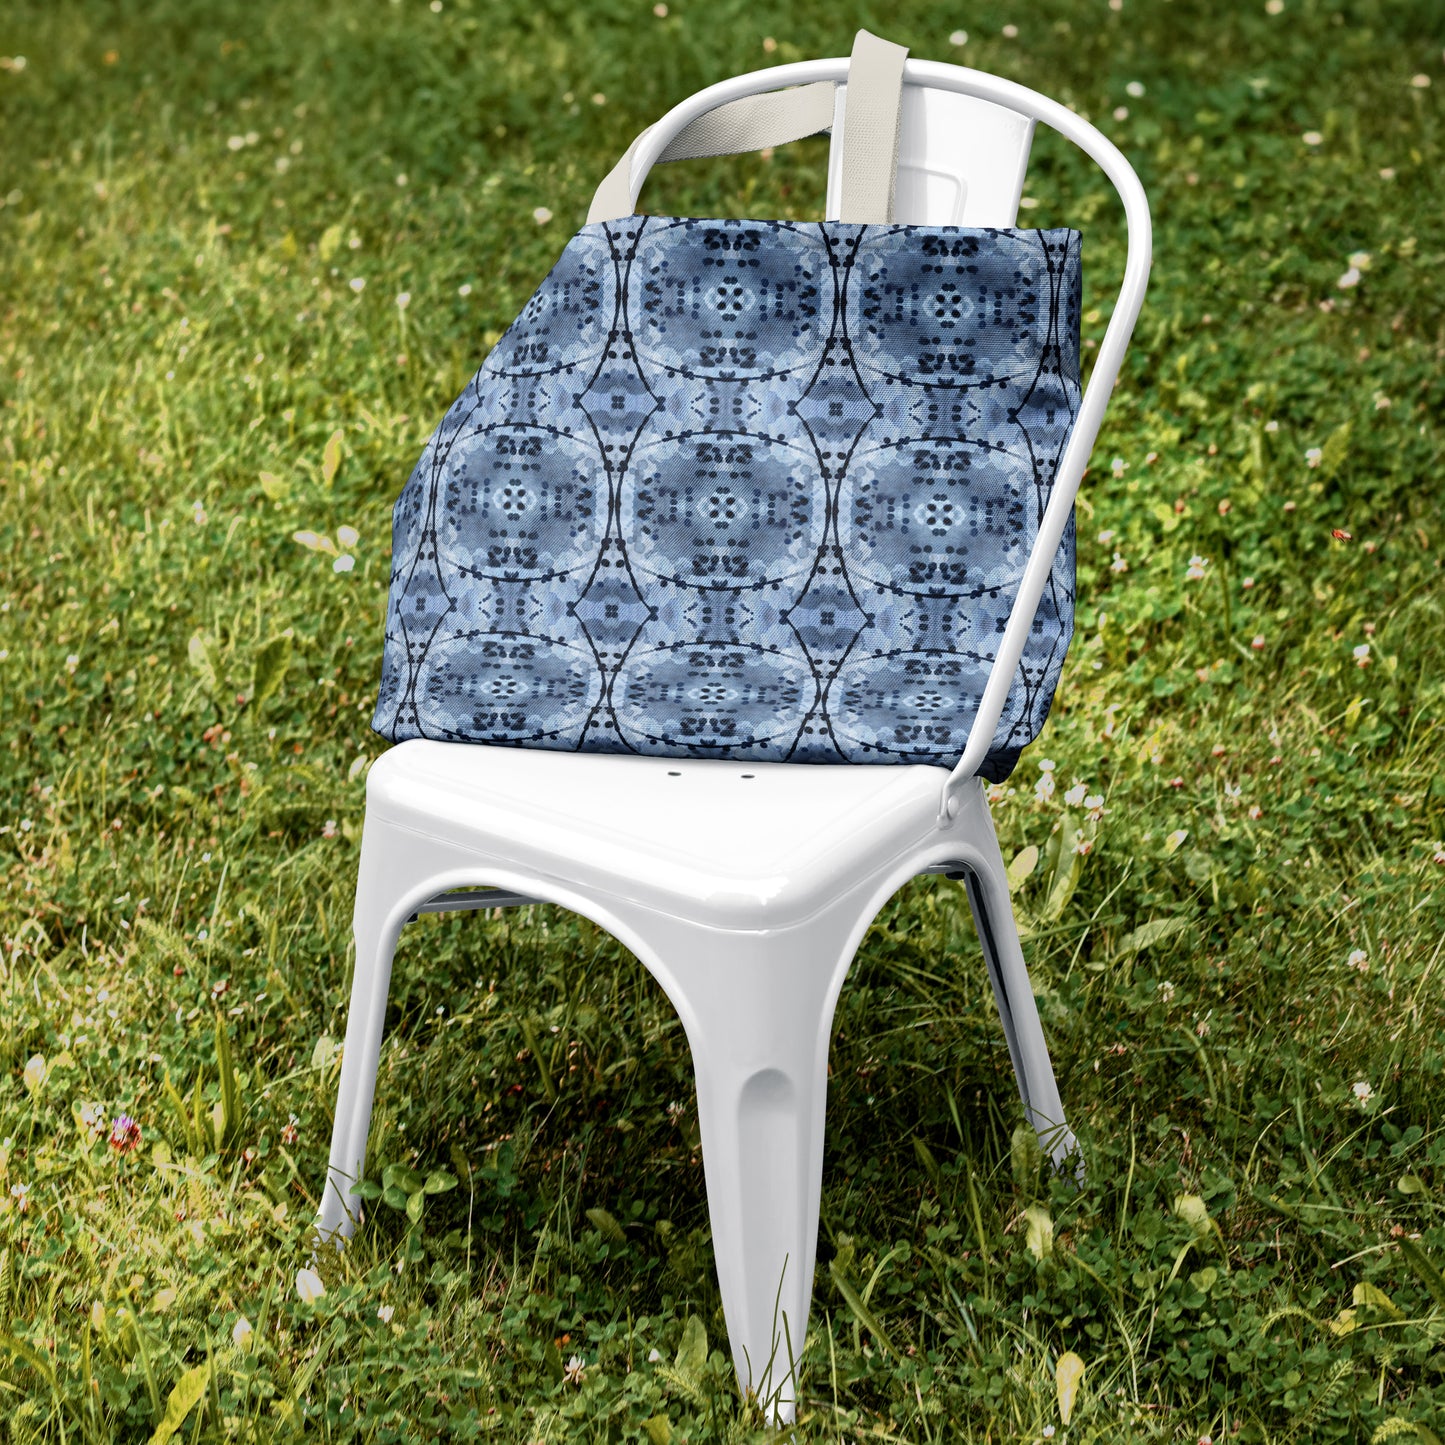 Large tote bag featuring an abstract hand-painted blue design, sitting on a white chair against a green grass background